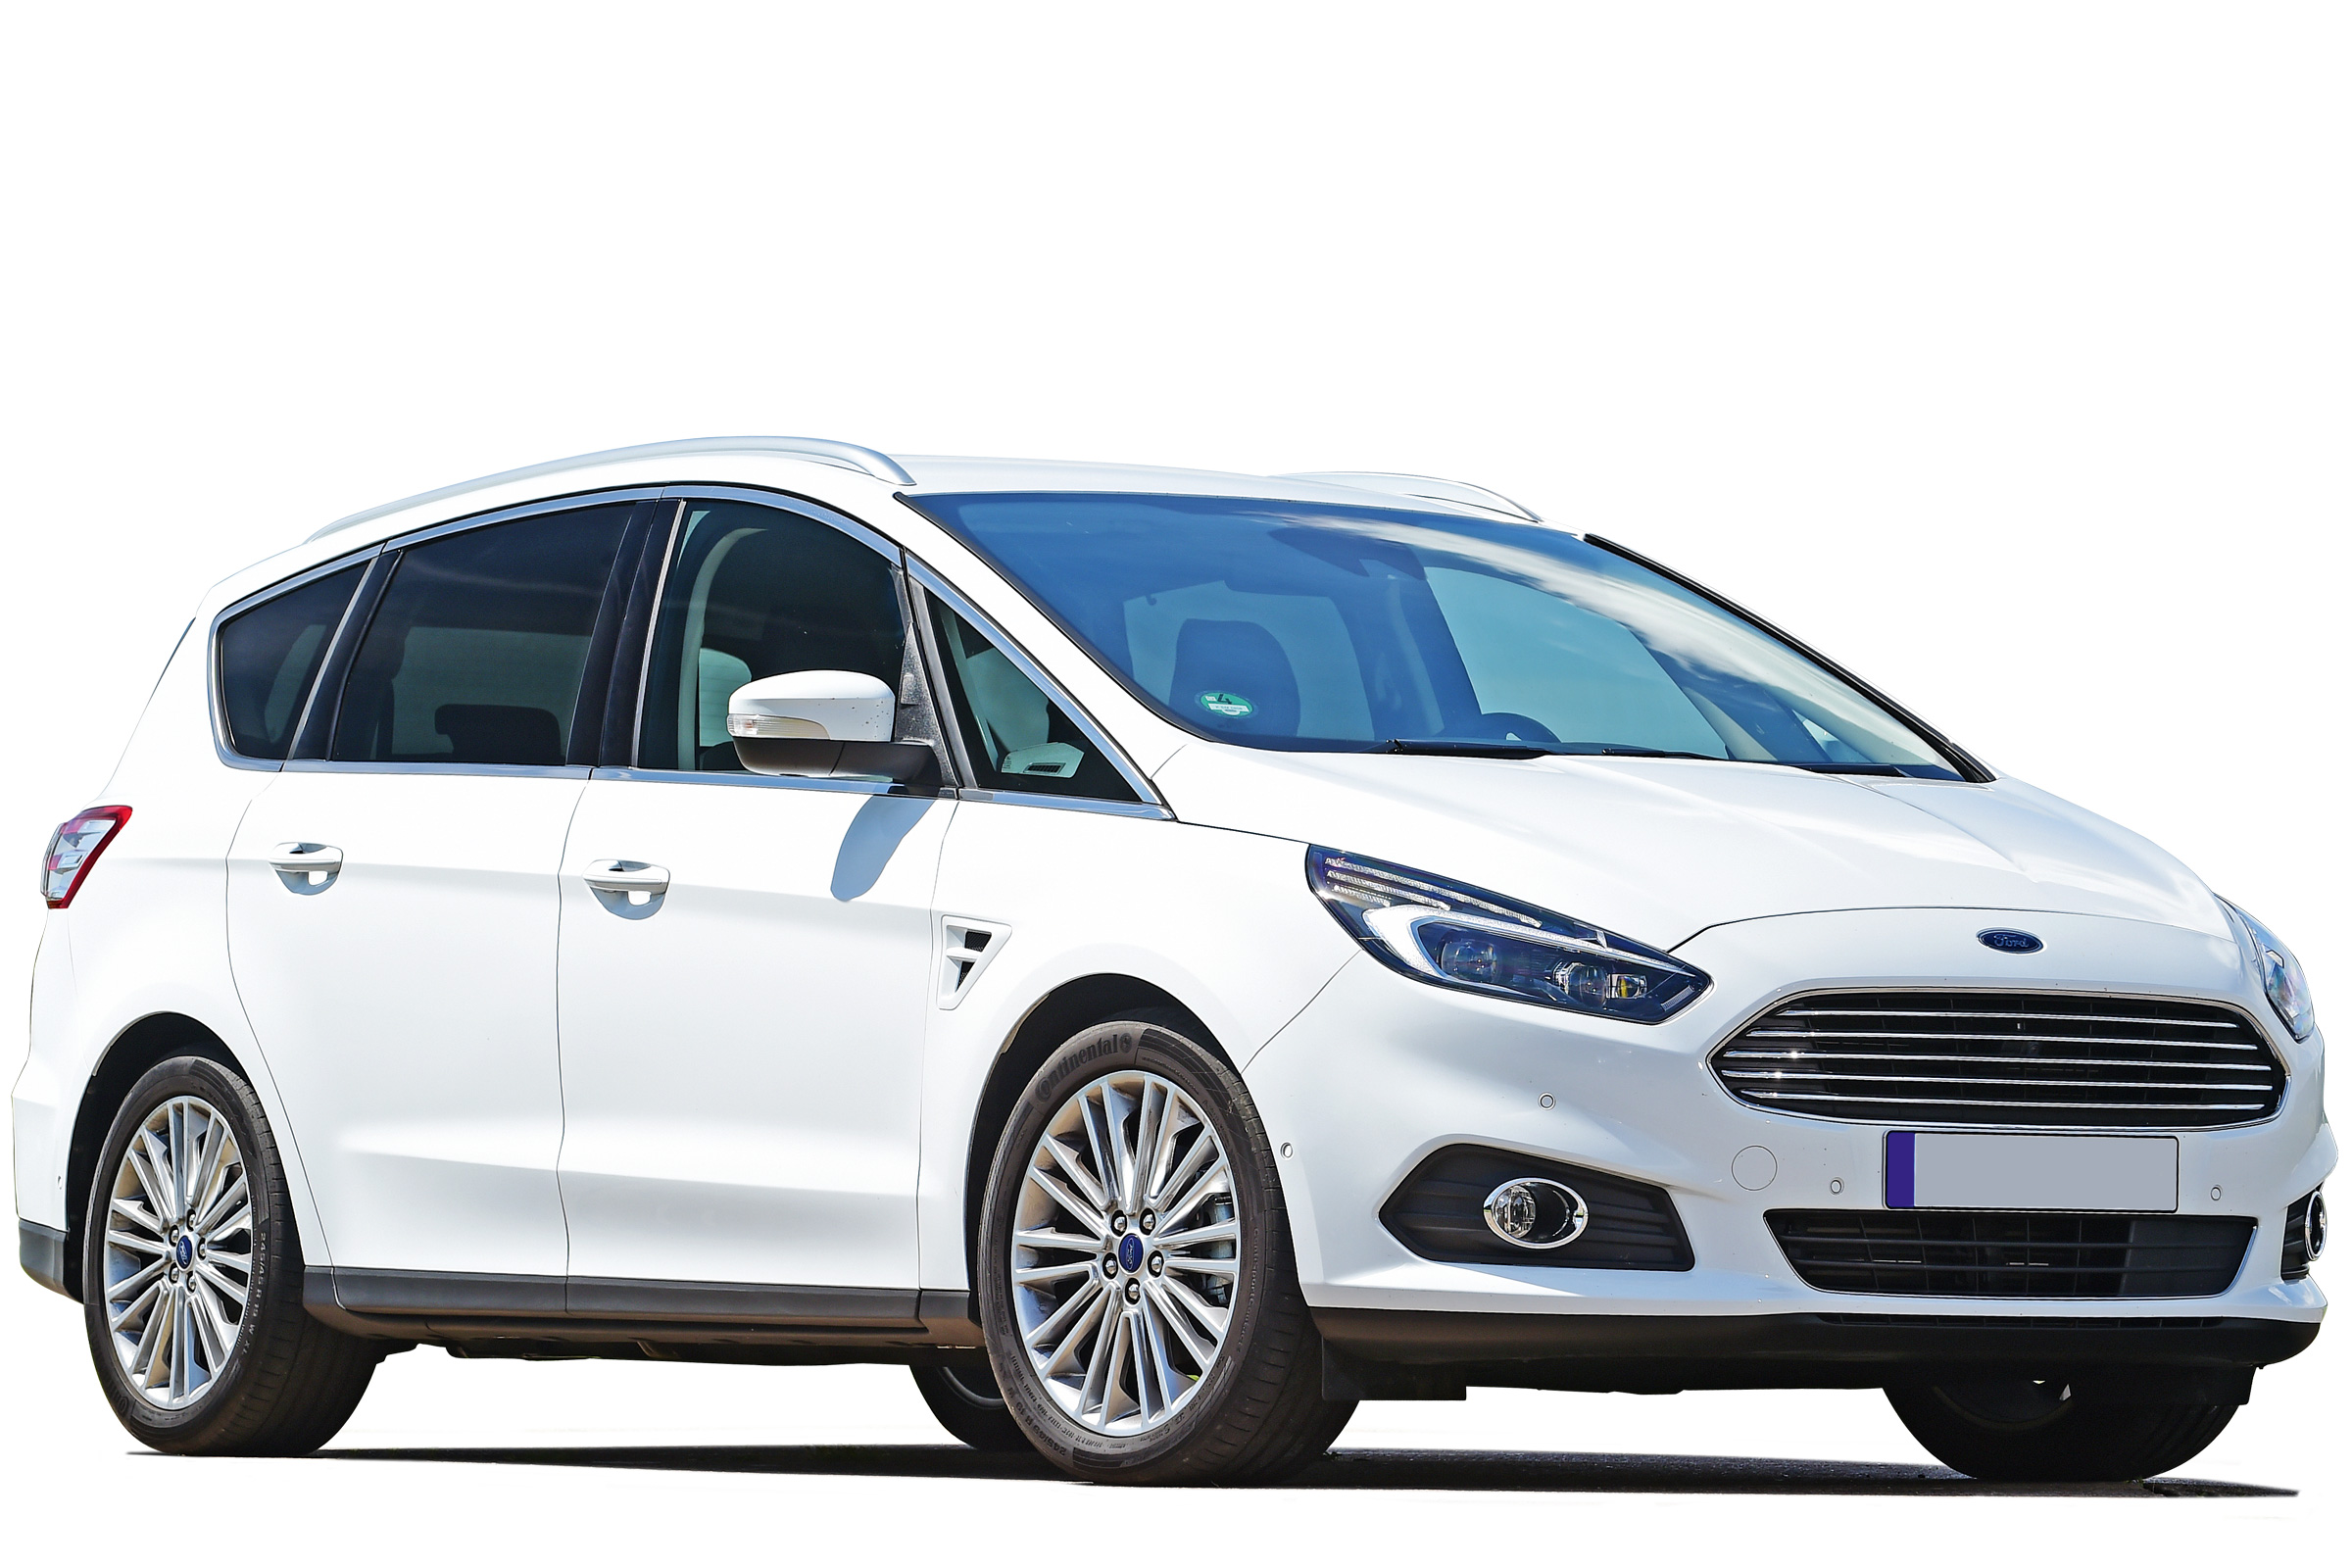 Ford S-Max HD wallpapers, Desktop wallpaper - most viewed